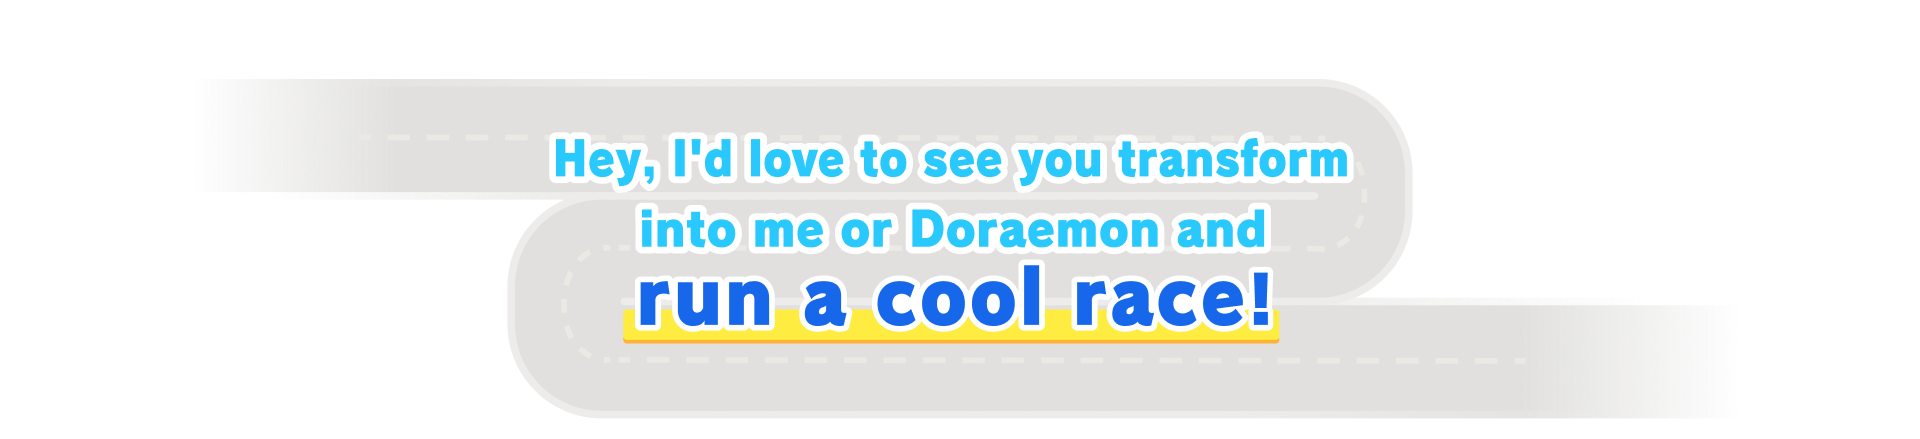 Hey, I'd love to see you transform into me or Doraemon and run a cool race!